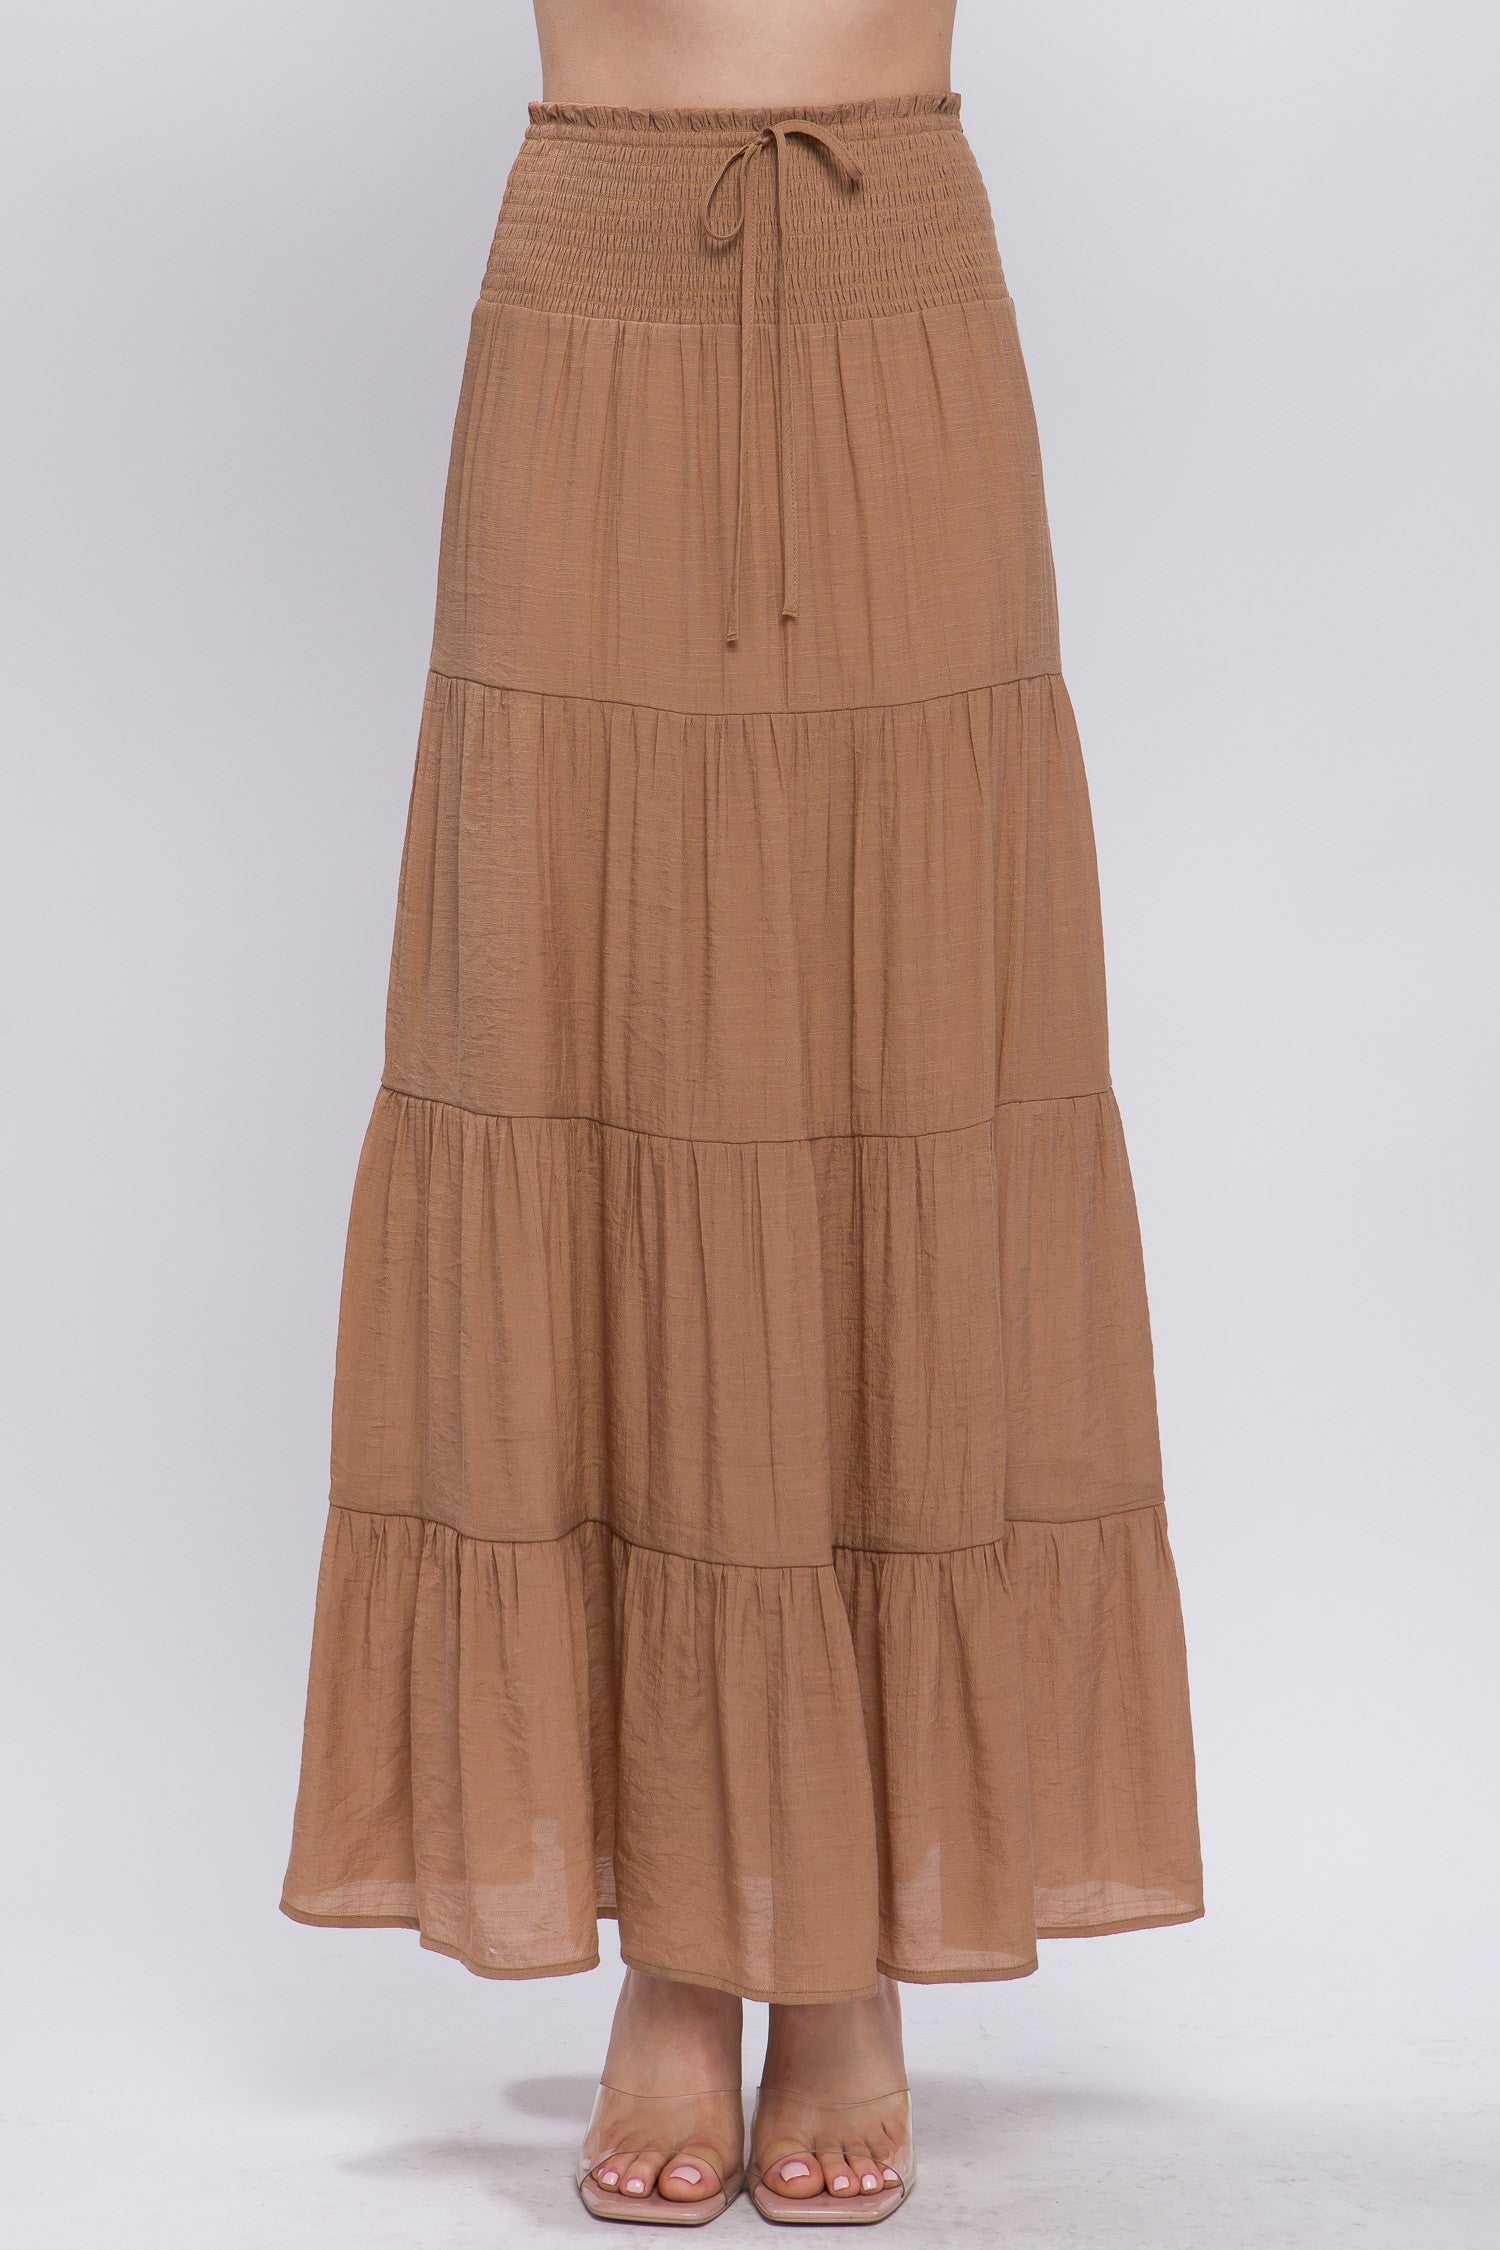 Tiered Maxi Skirt, REBELRY BOUTIQUE, Arvada, CO